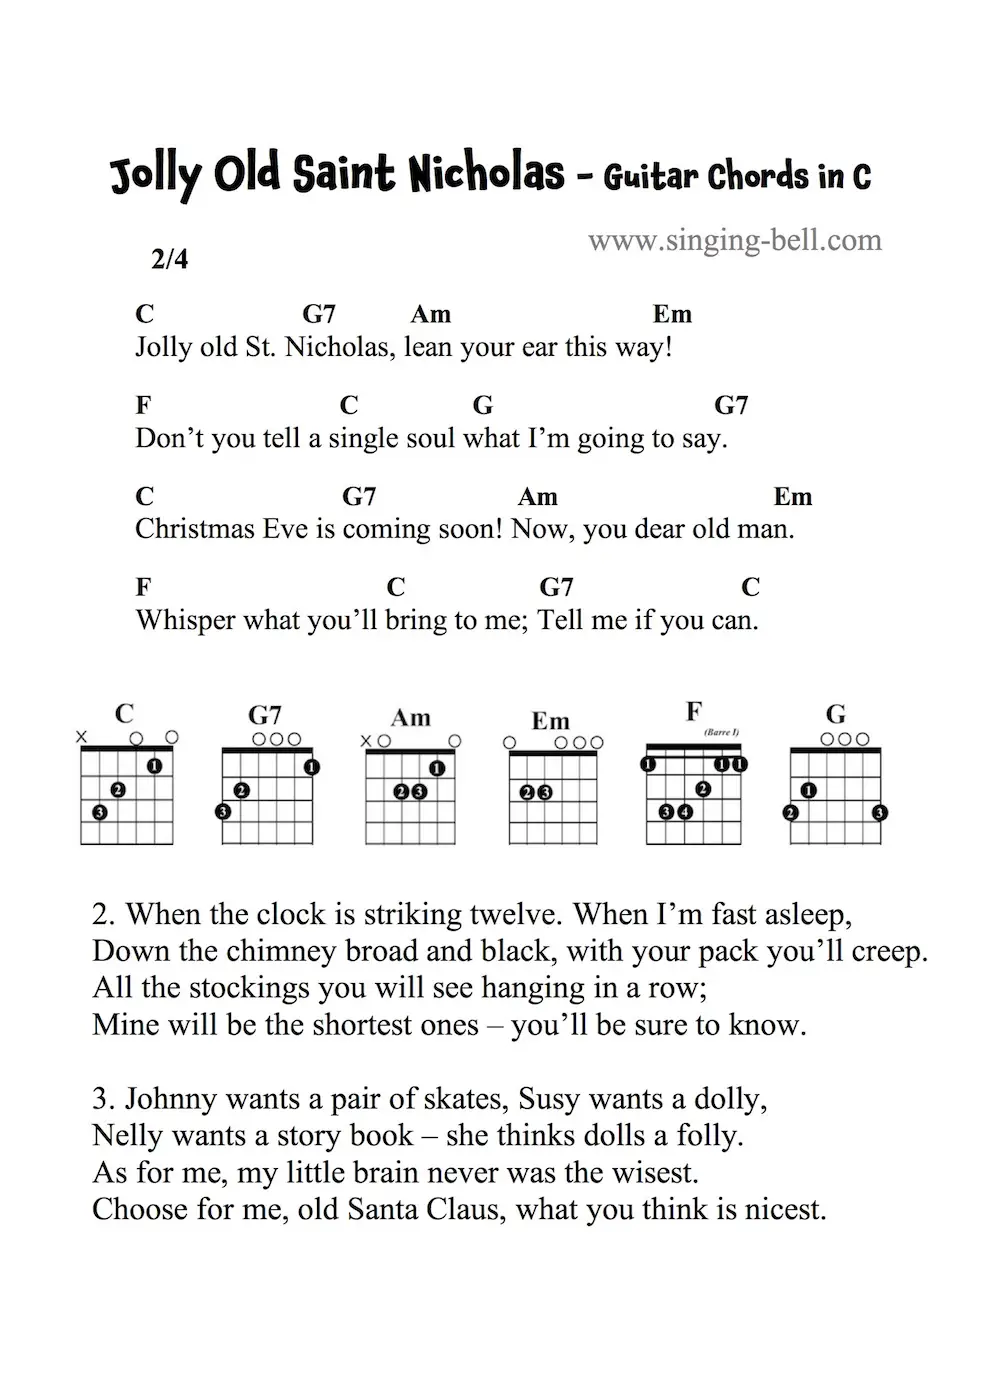 Jolly Old Saint Nicholas Guitar Chords and Tabs in C.